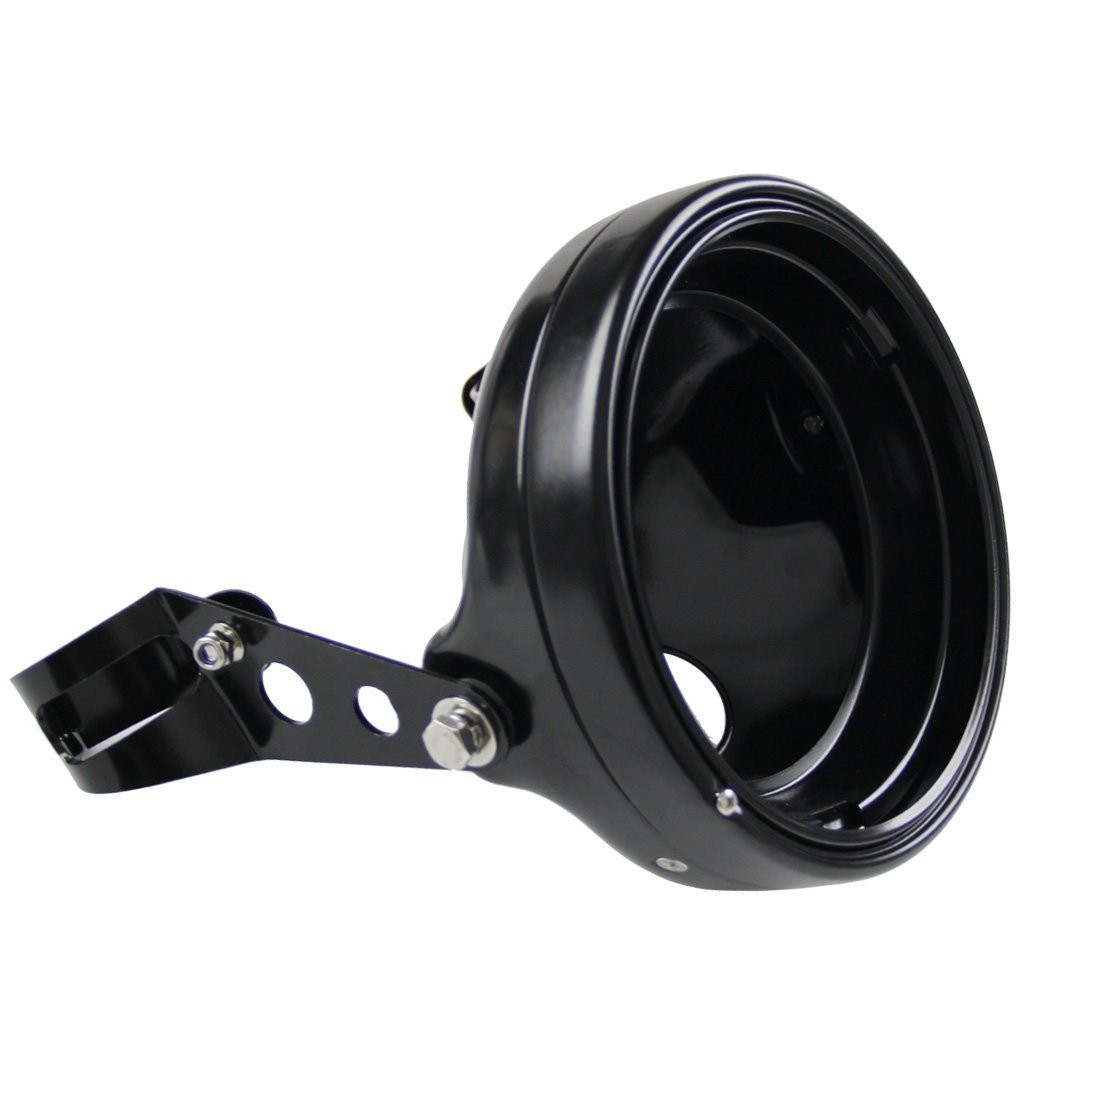 Replacement Headlight Buckets - Eagle Lights 7" Meteor Headlight Bucket Housing For Motorcycles With 32MM To 40MM Fork Tubes